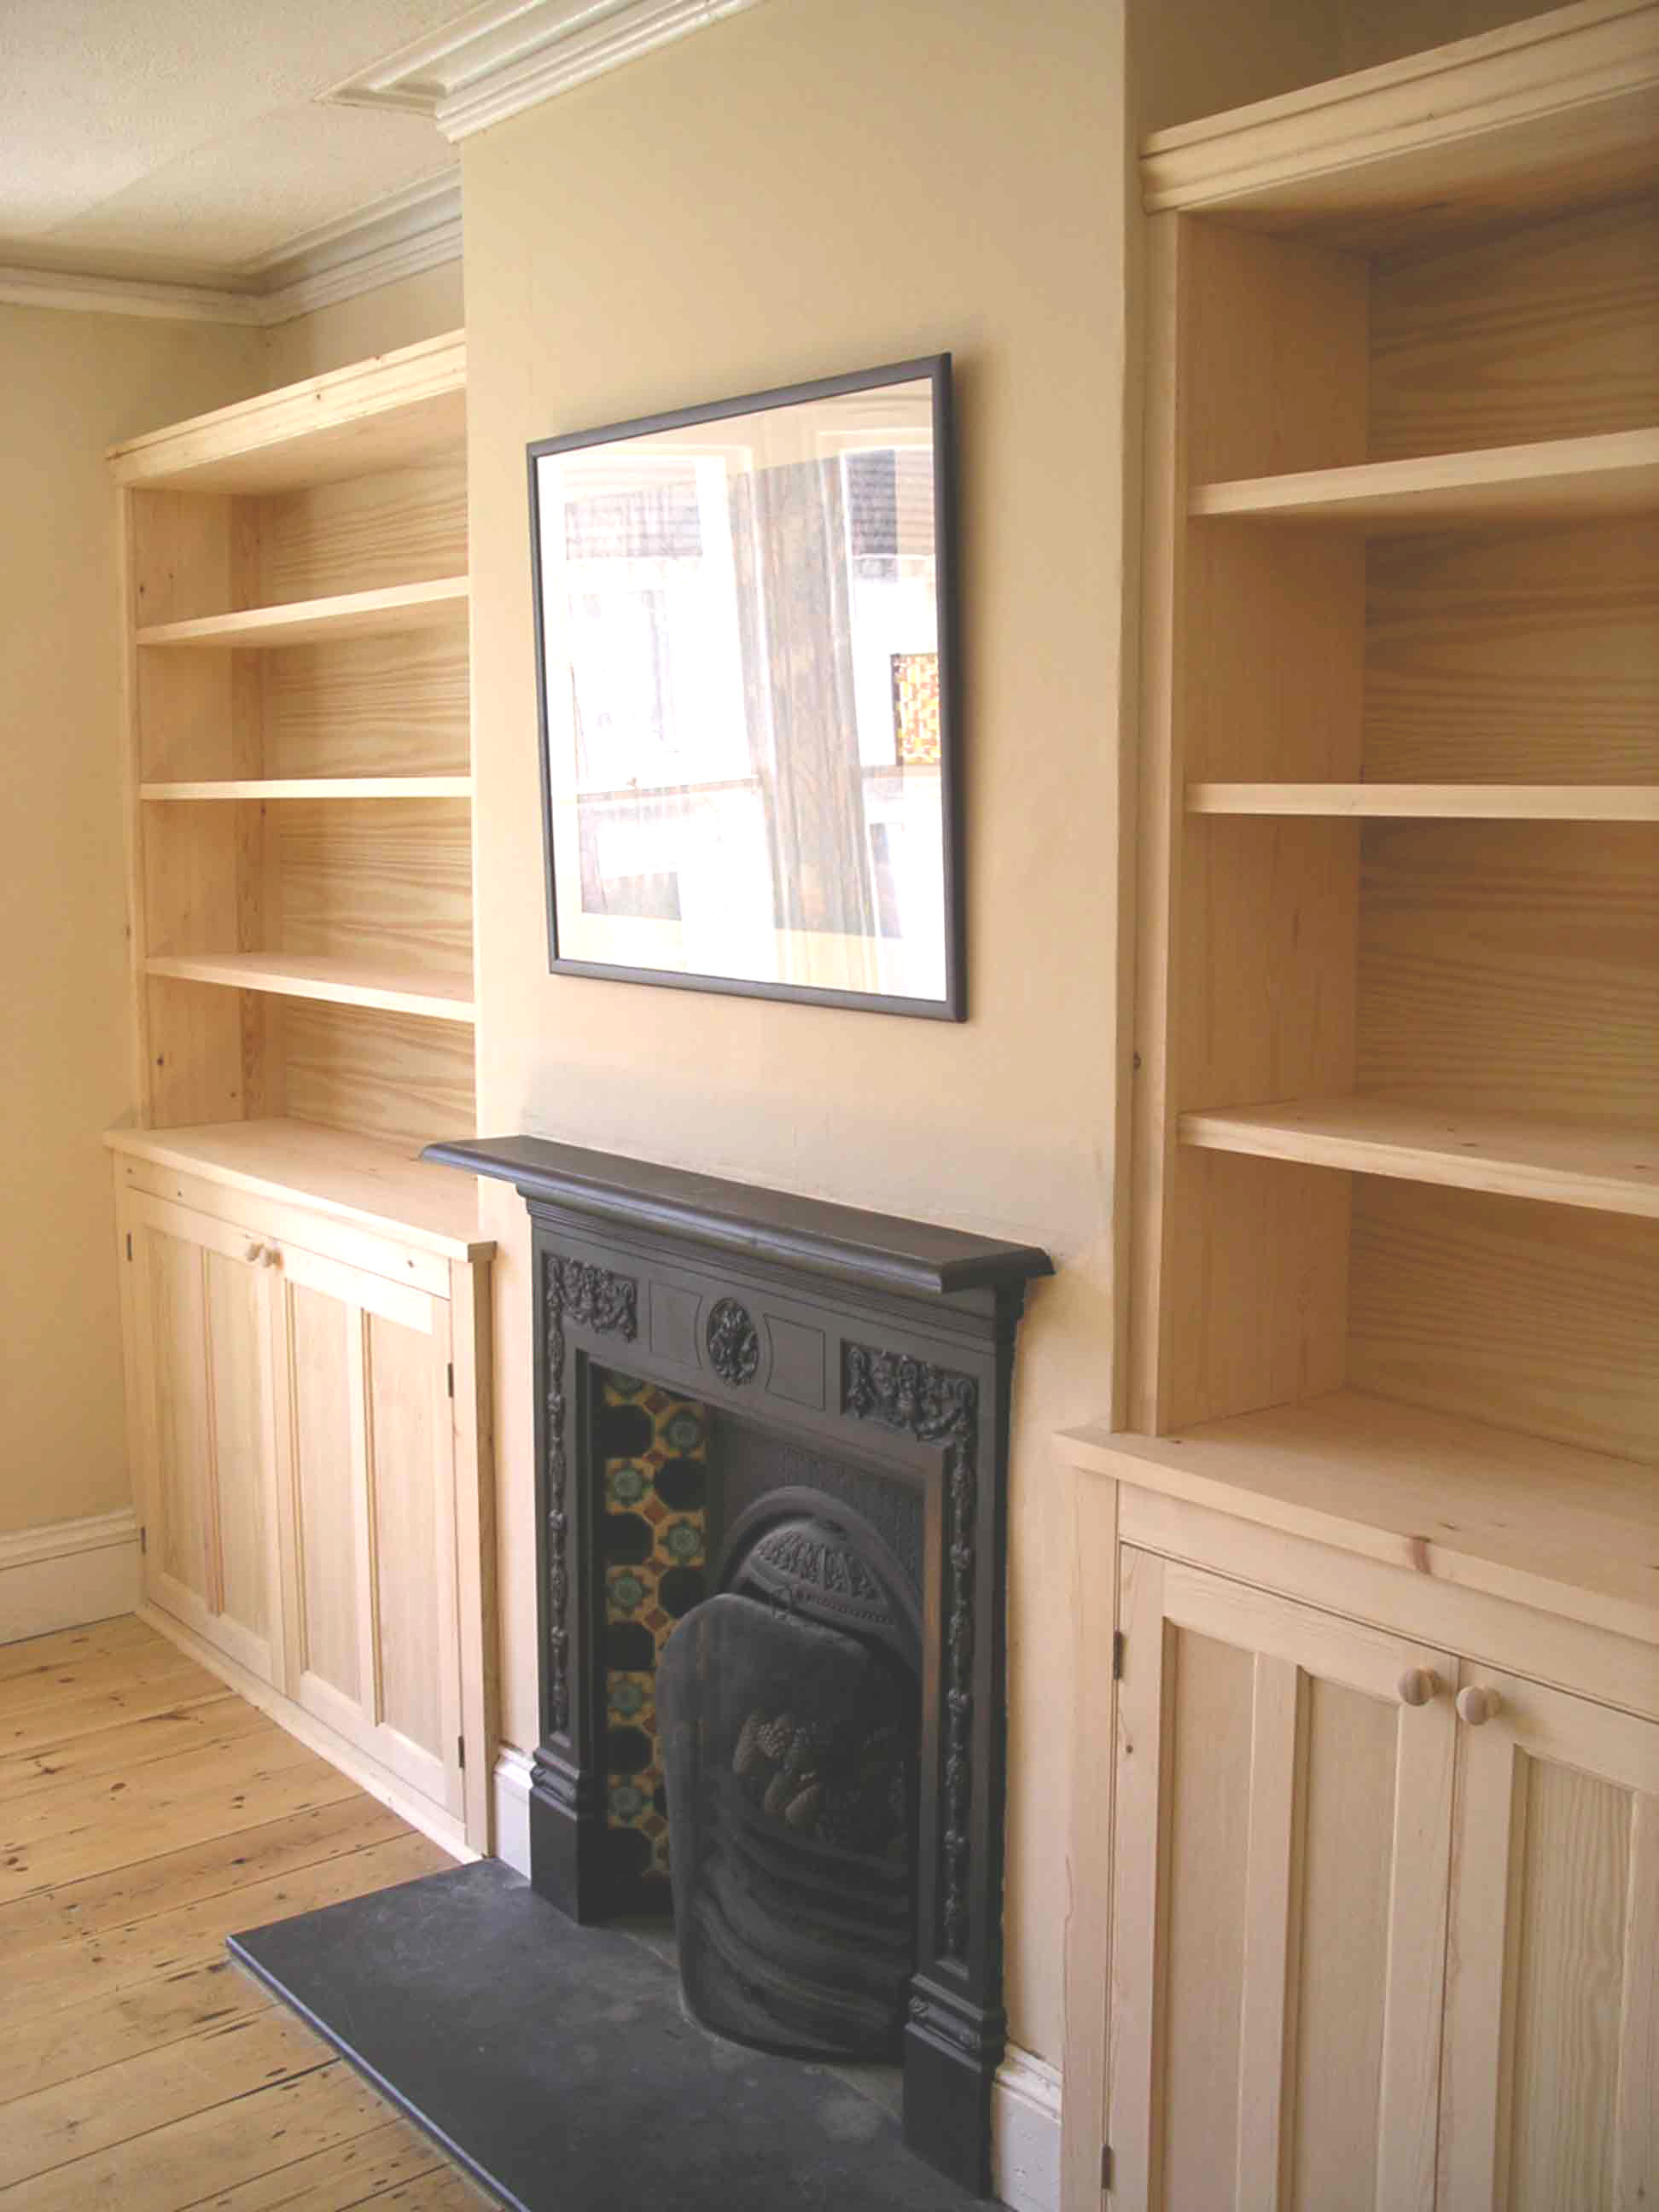 Victorian style cupboards bespoke made in alcoves